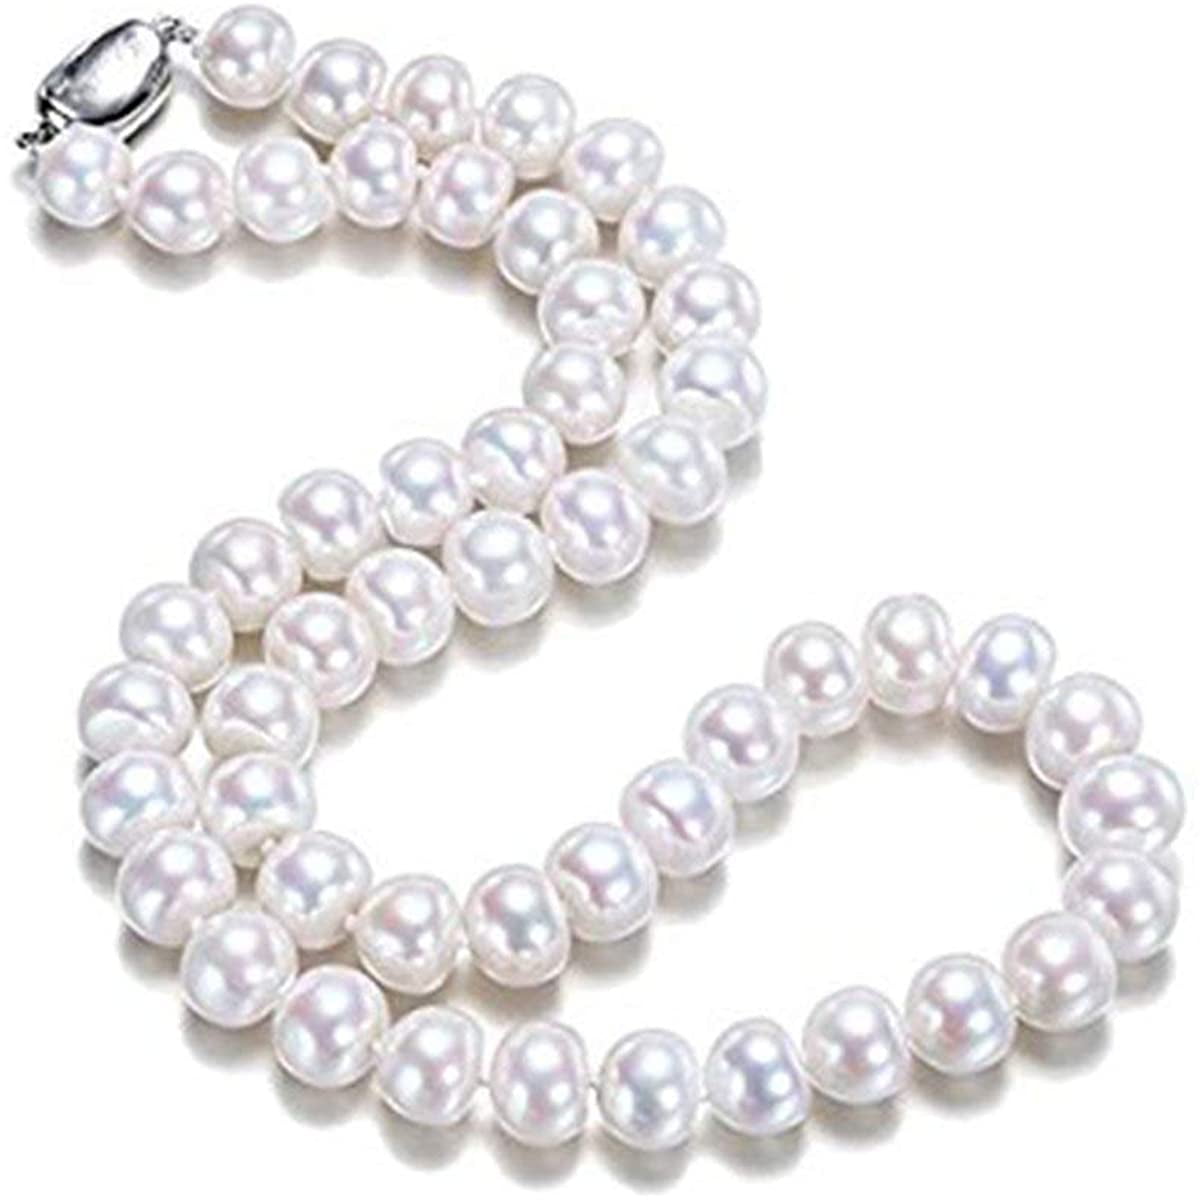 Long 65" 7-8mm Genuine Natural White Akoya Cultured Pearl Necklace Hand Knotted 